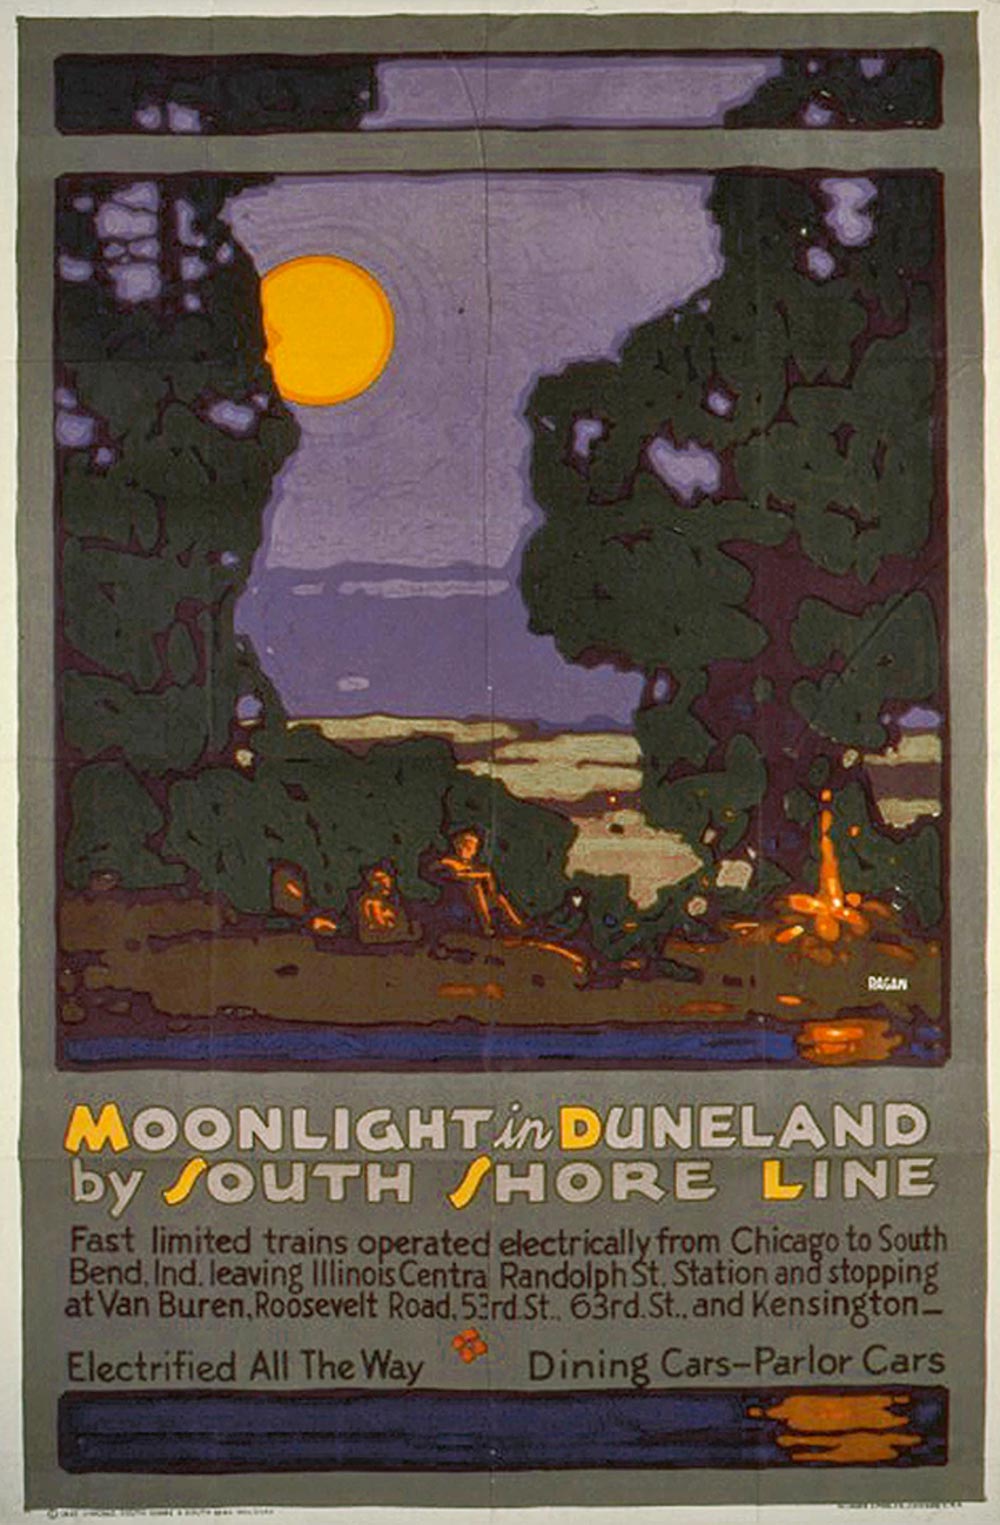 South-Shore-Line-posters-Moonlight-in-Duneland